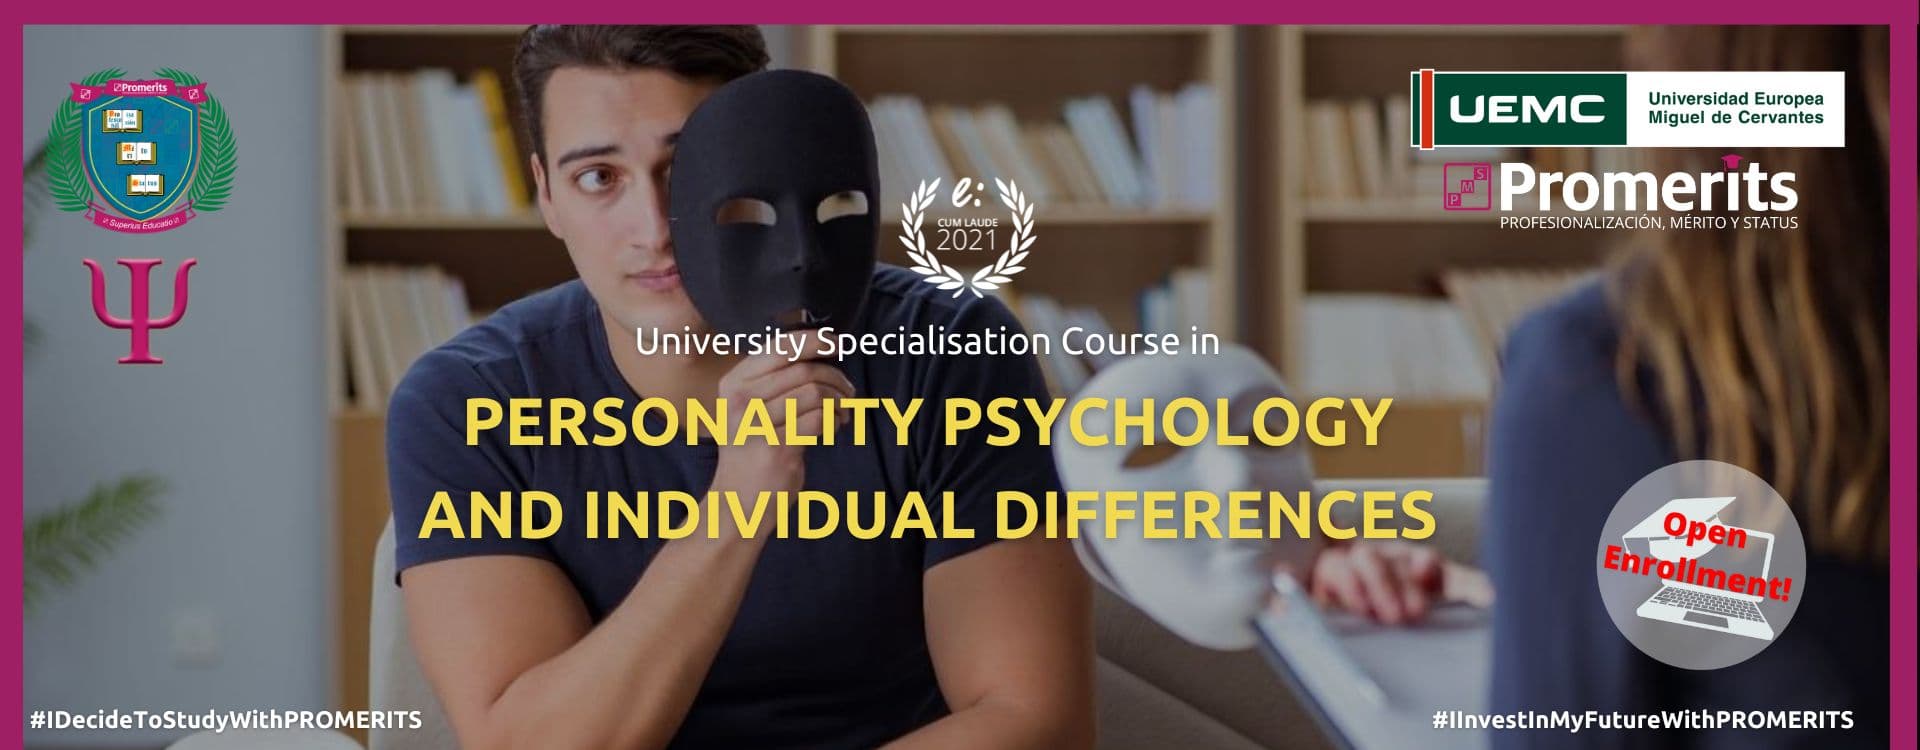 University Specialisation Course in PERSONALITY PSYCHOLOGY AND INDIVIDUAL DIFFERENCES